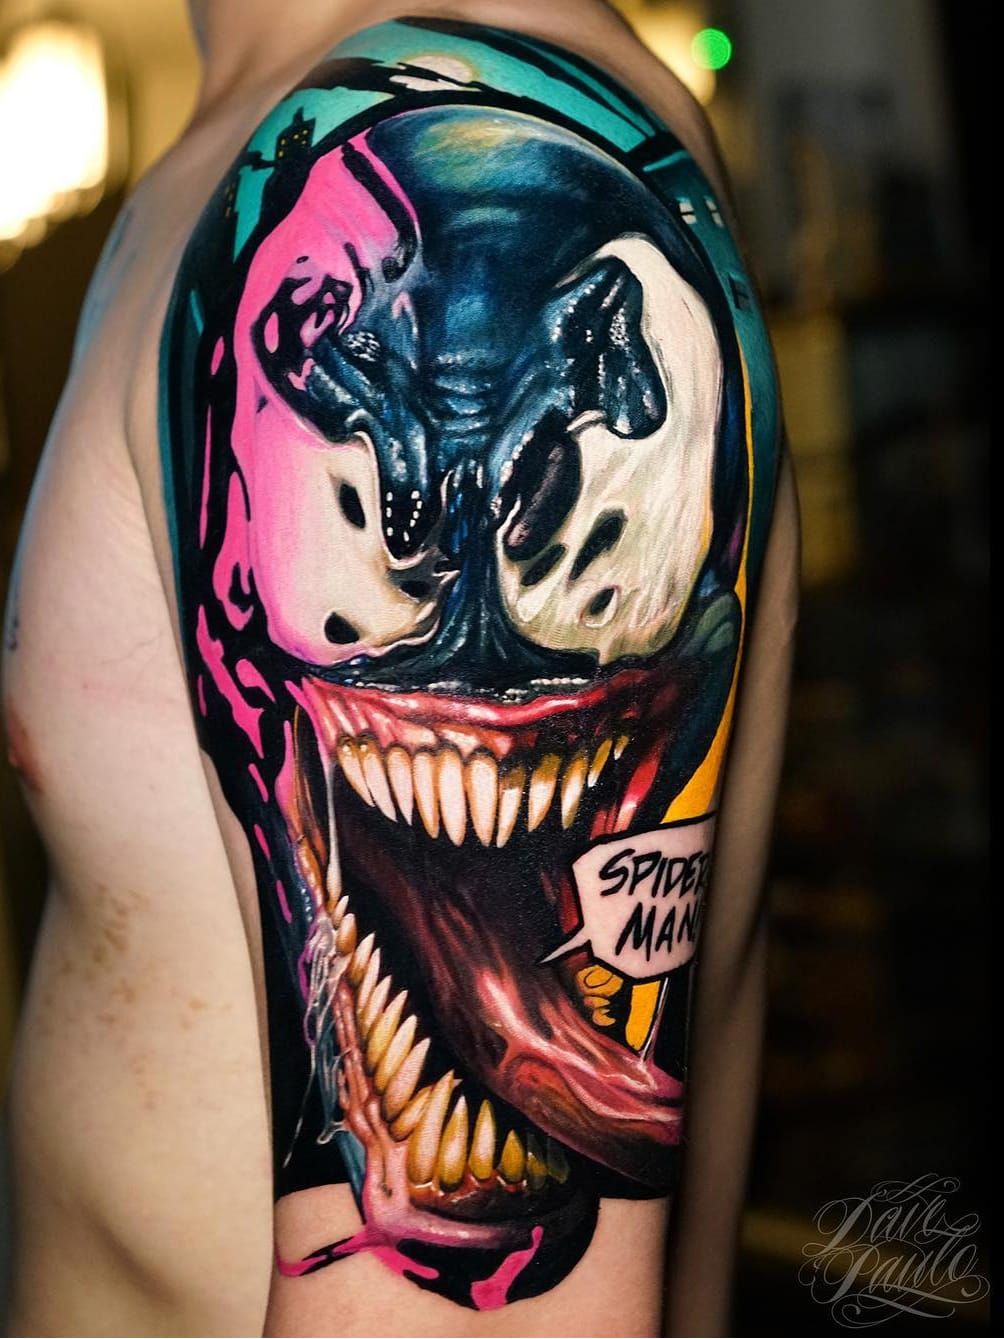 Why are TikTok users getting Venom tattoos Clever illusion explained